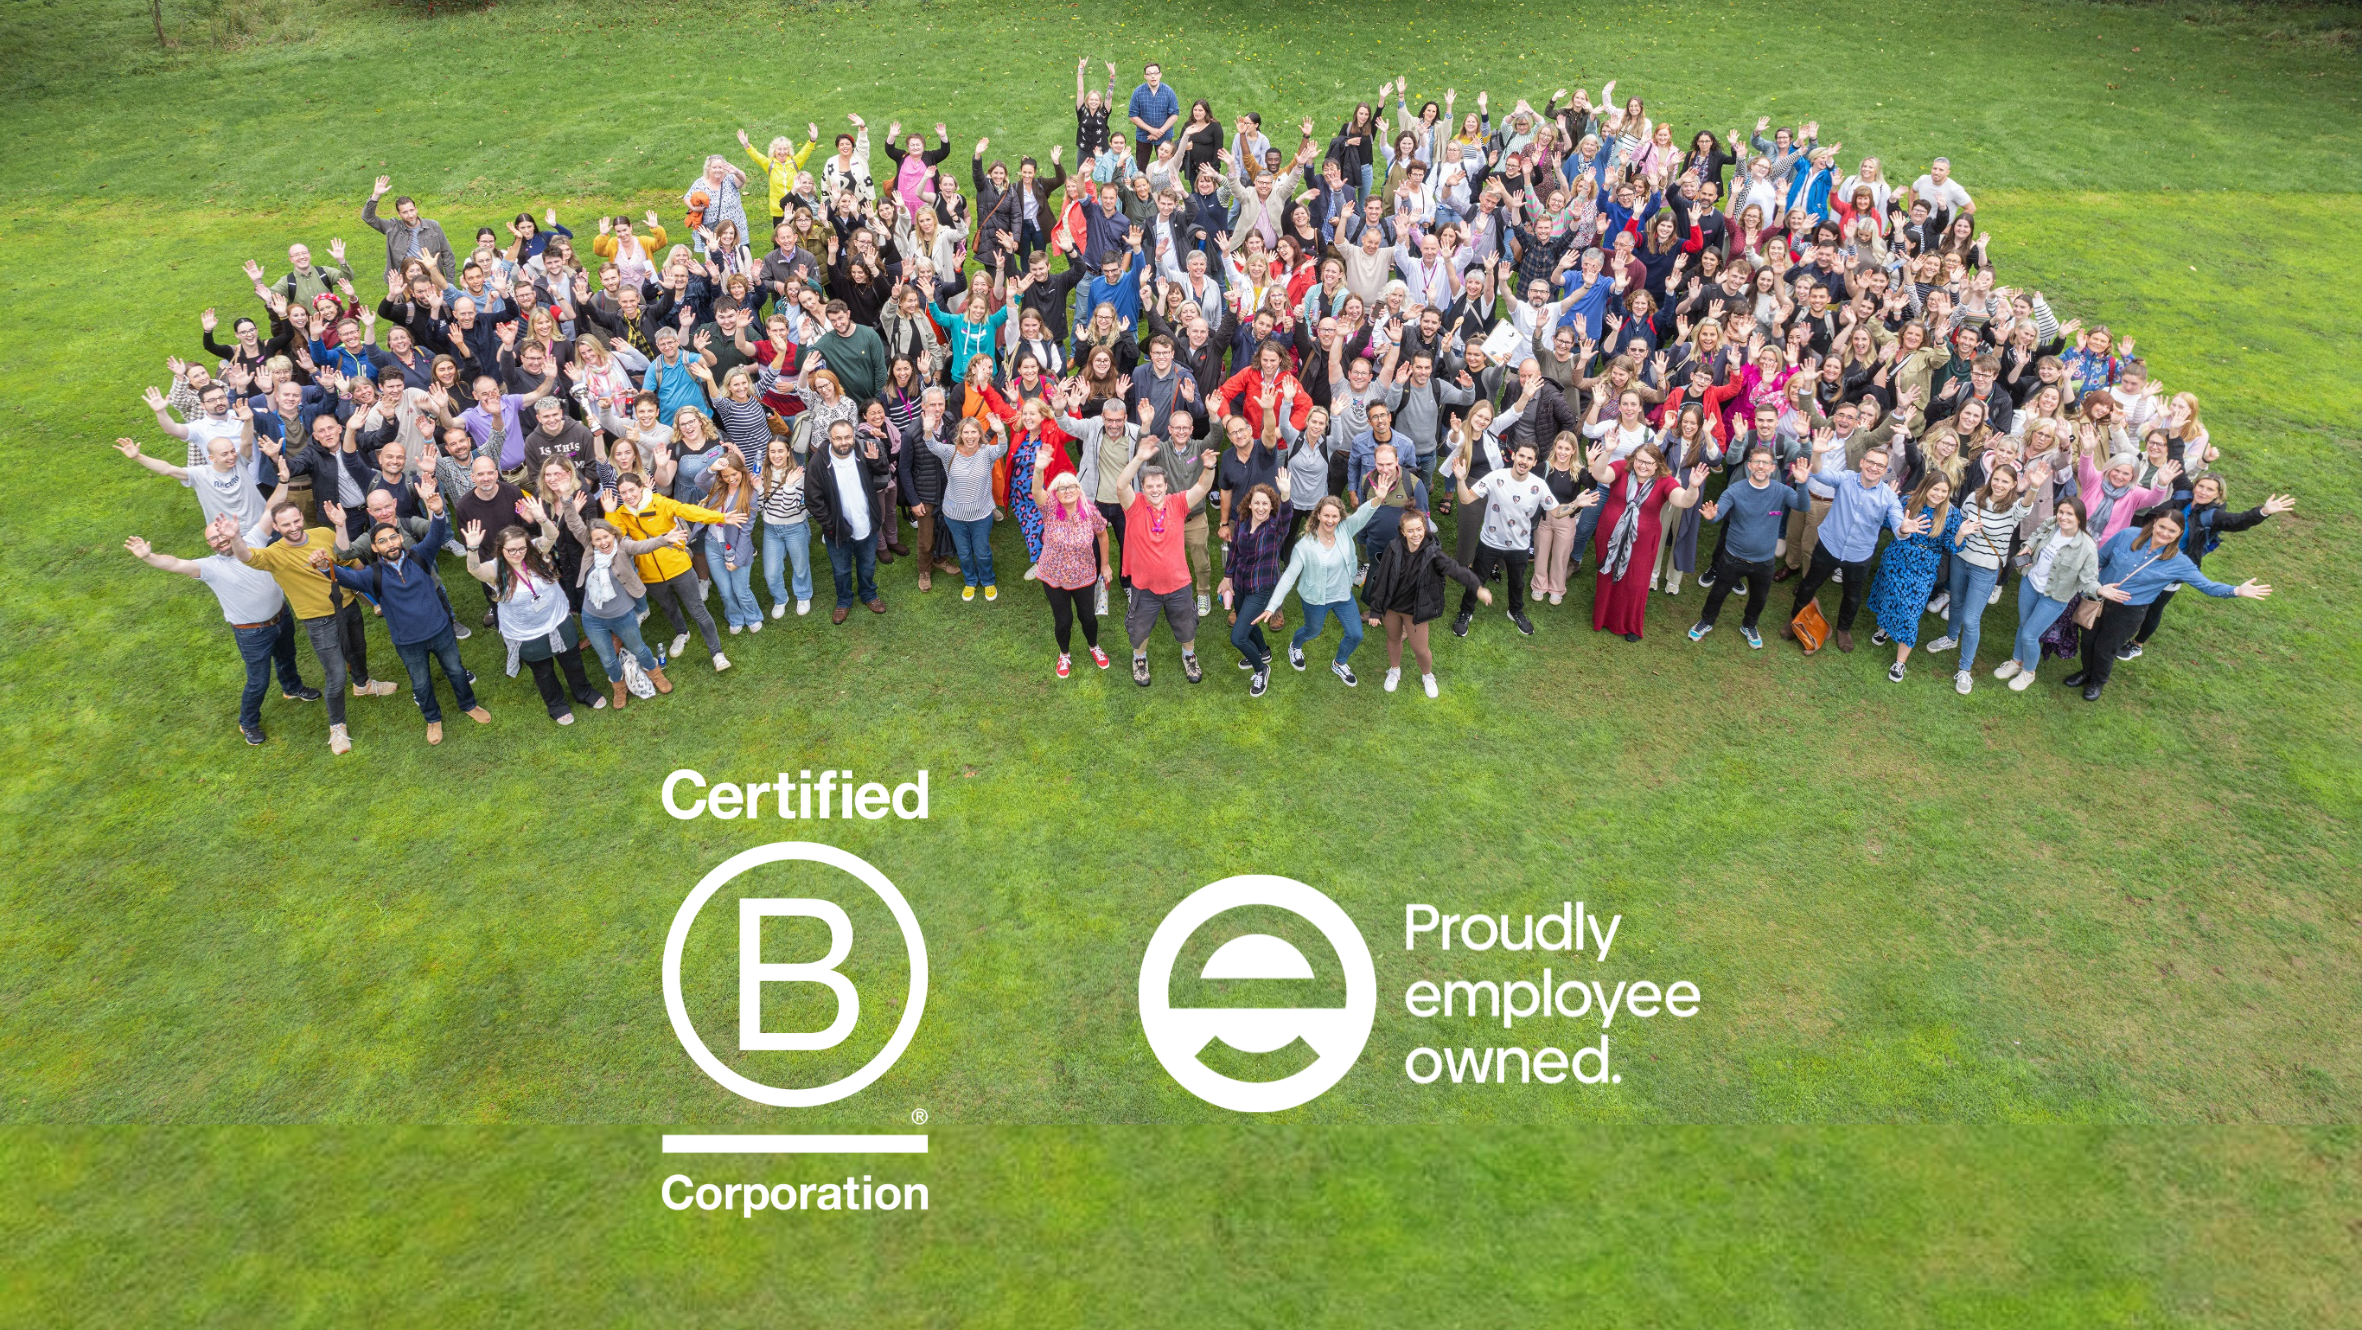 Concept for - B Corp + Employee Owned = Powering Positive Impact